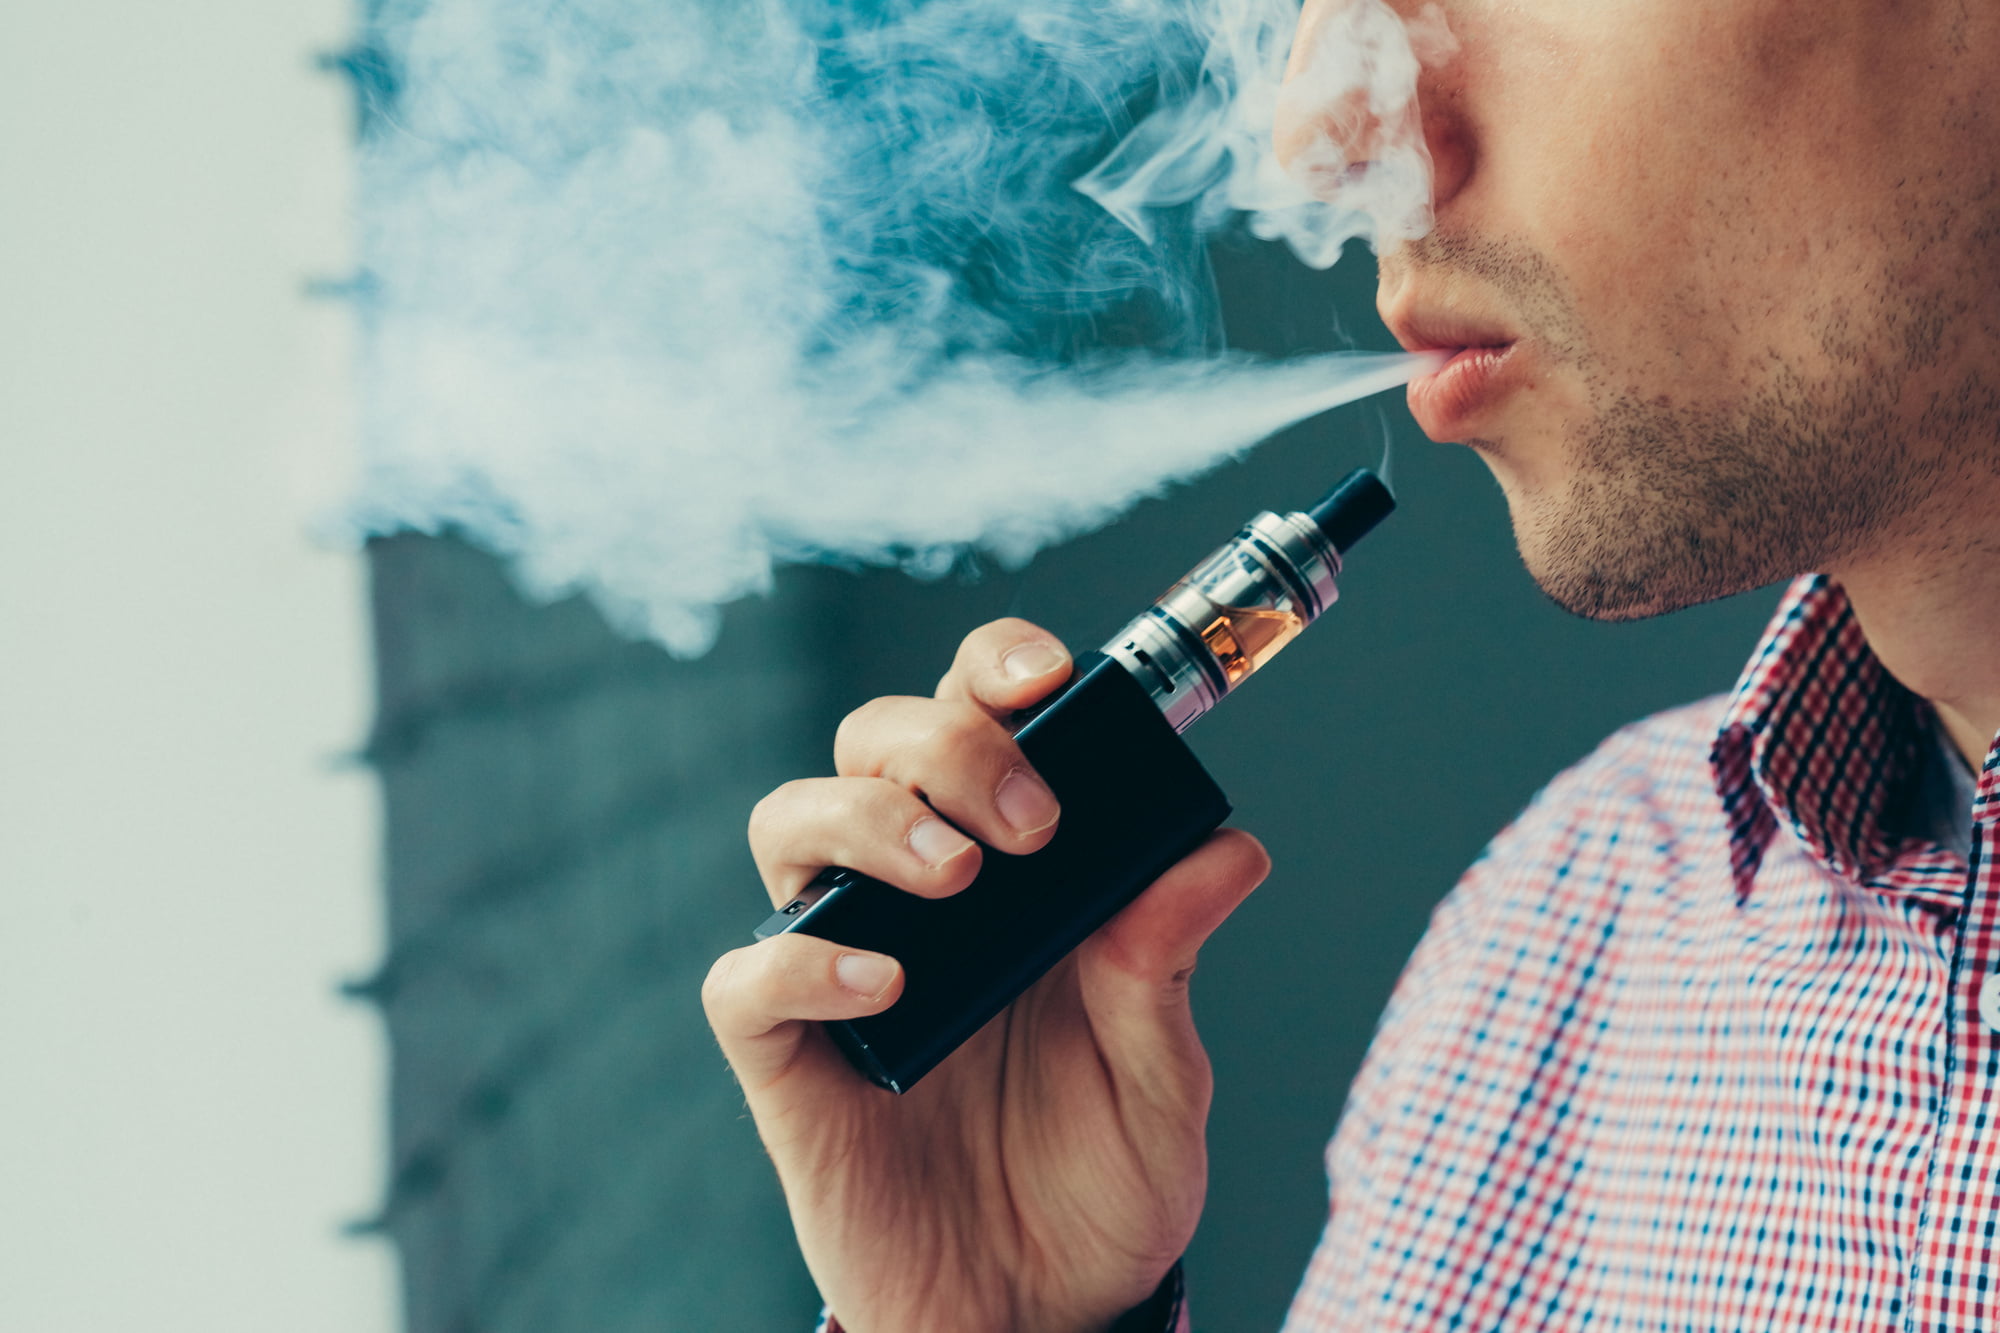 Are you thinking about getting a CBD oil vape cartridge and want to know more about the benefits? Keep reading and learn more here.